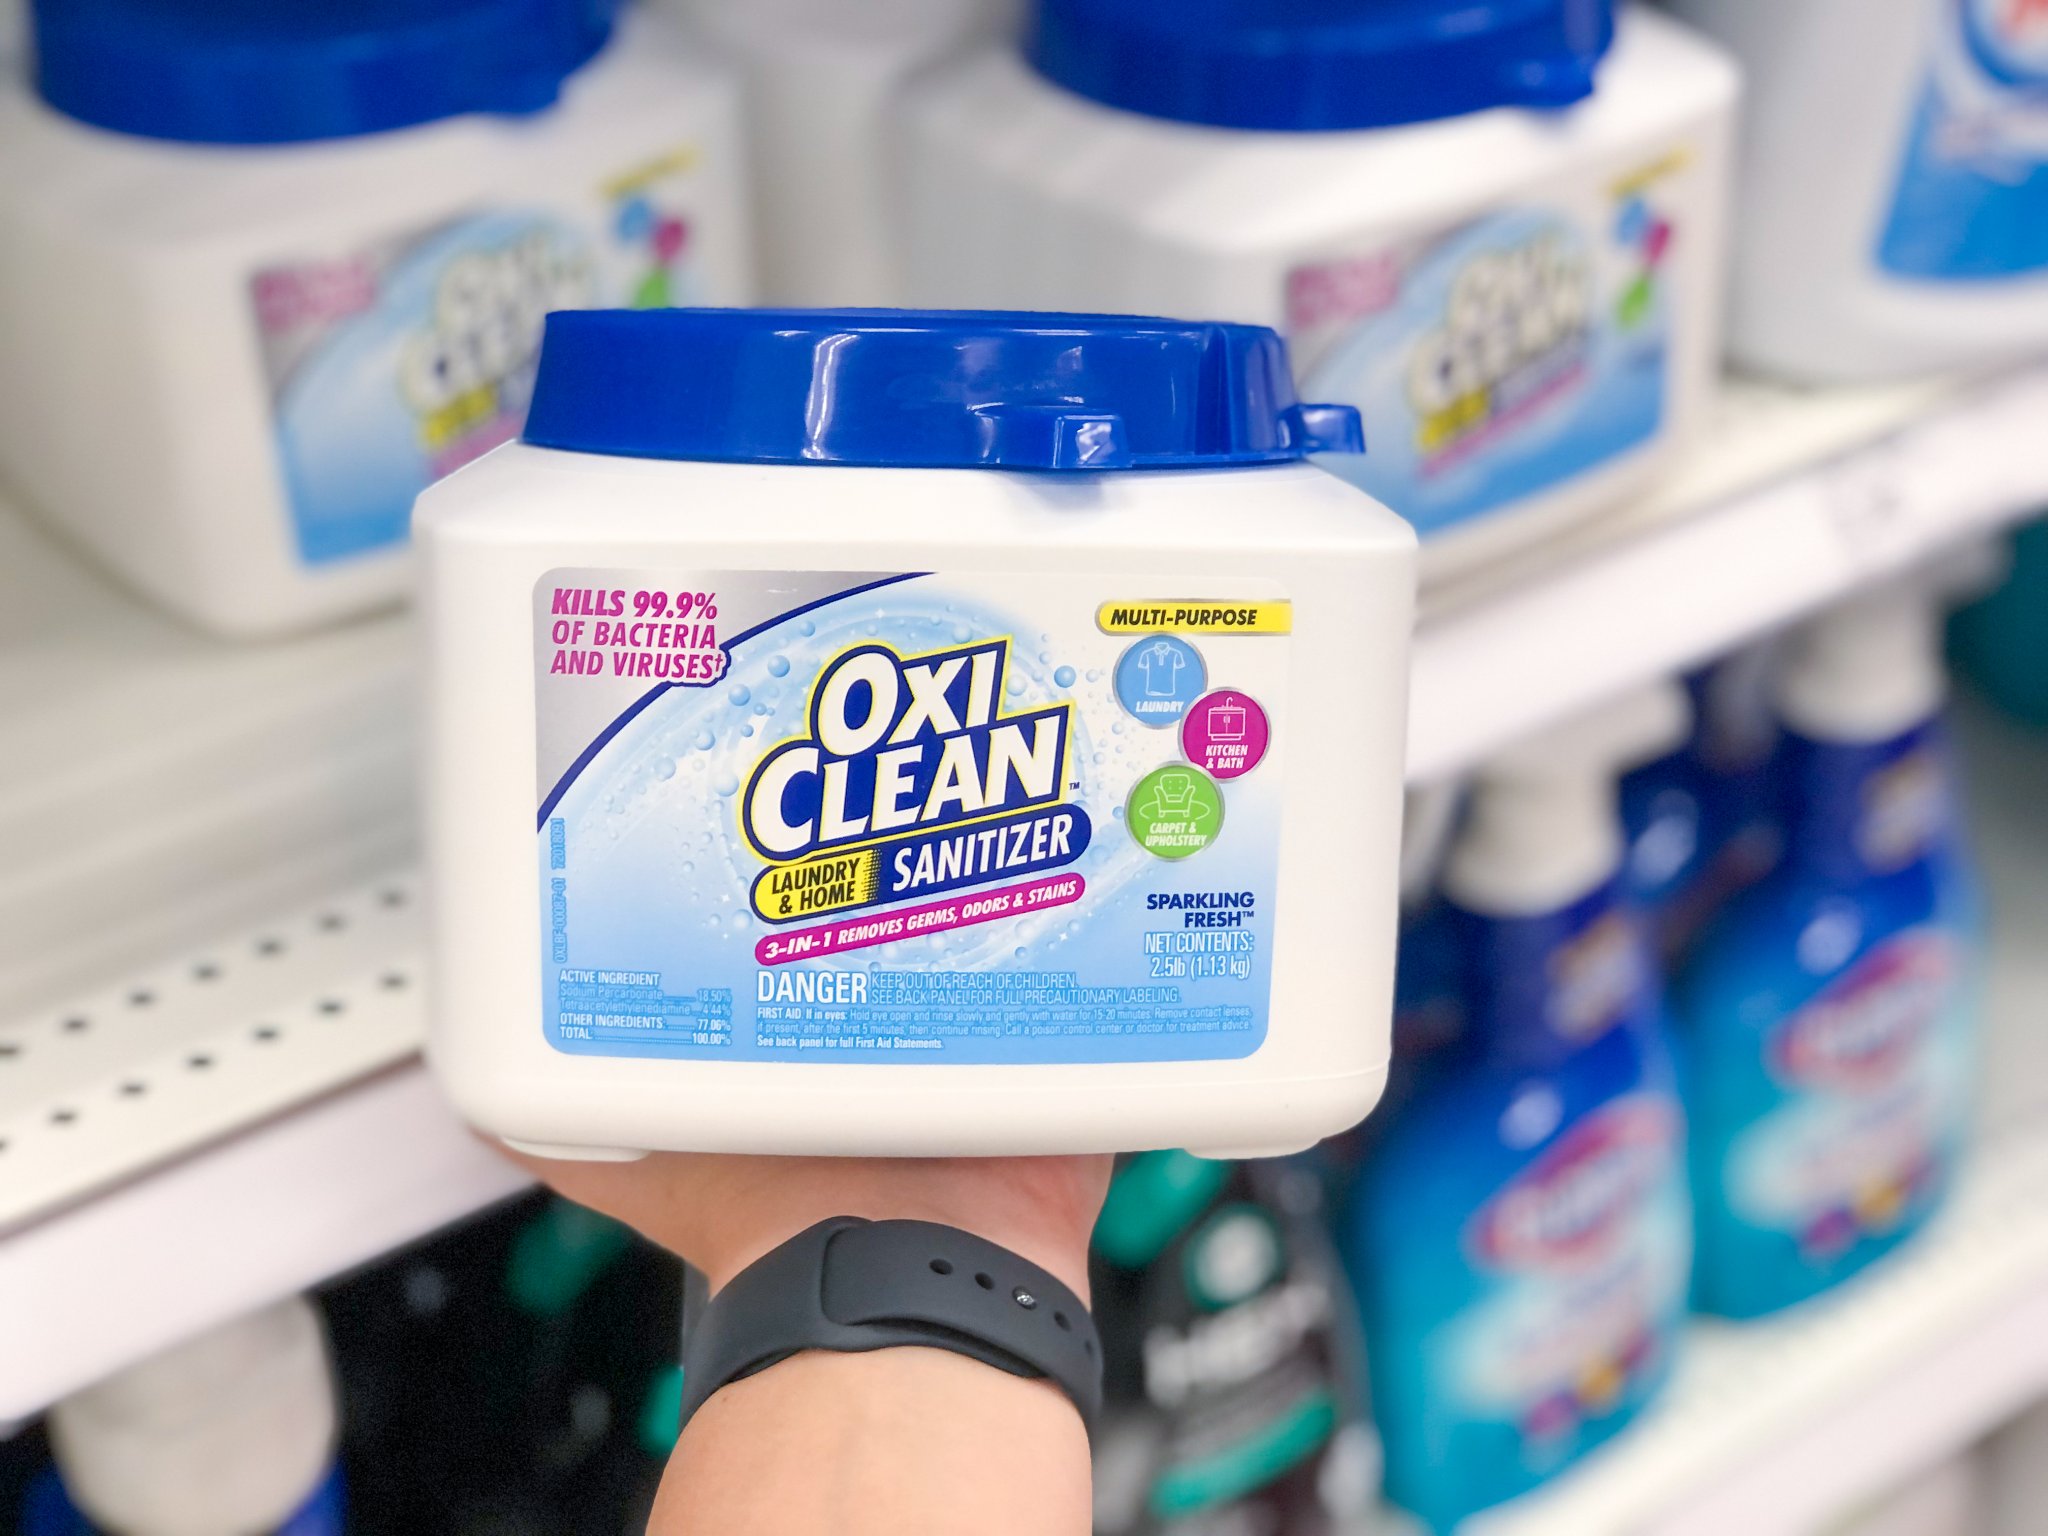 Oxiclean Home and Laundry Sanitizer